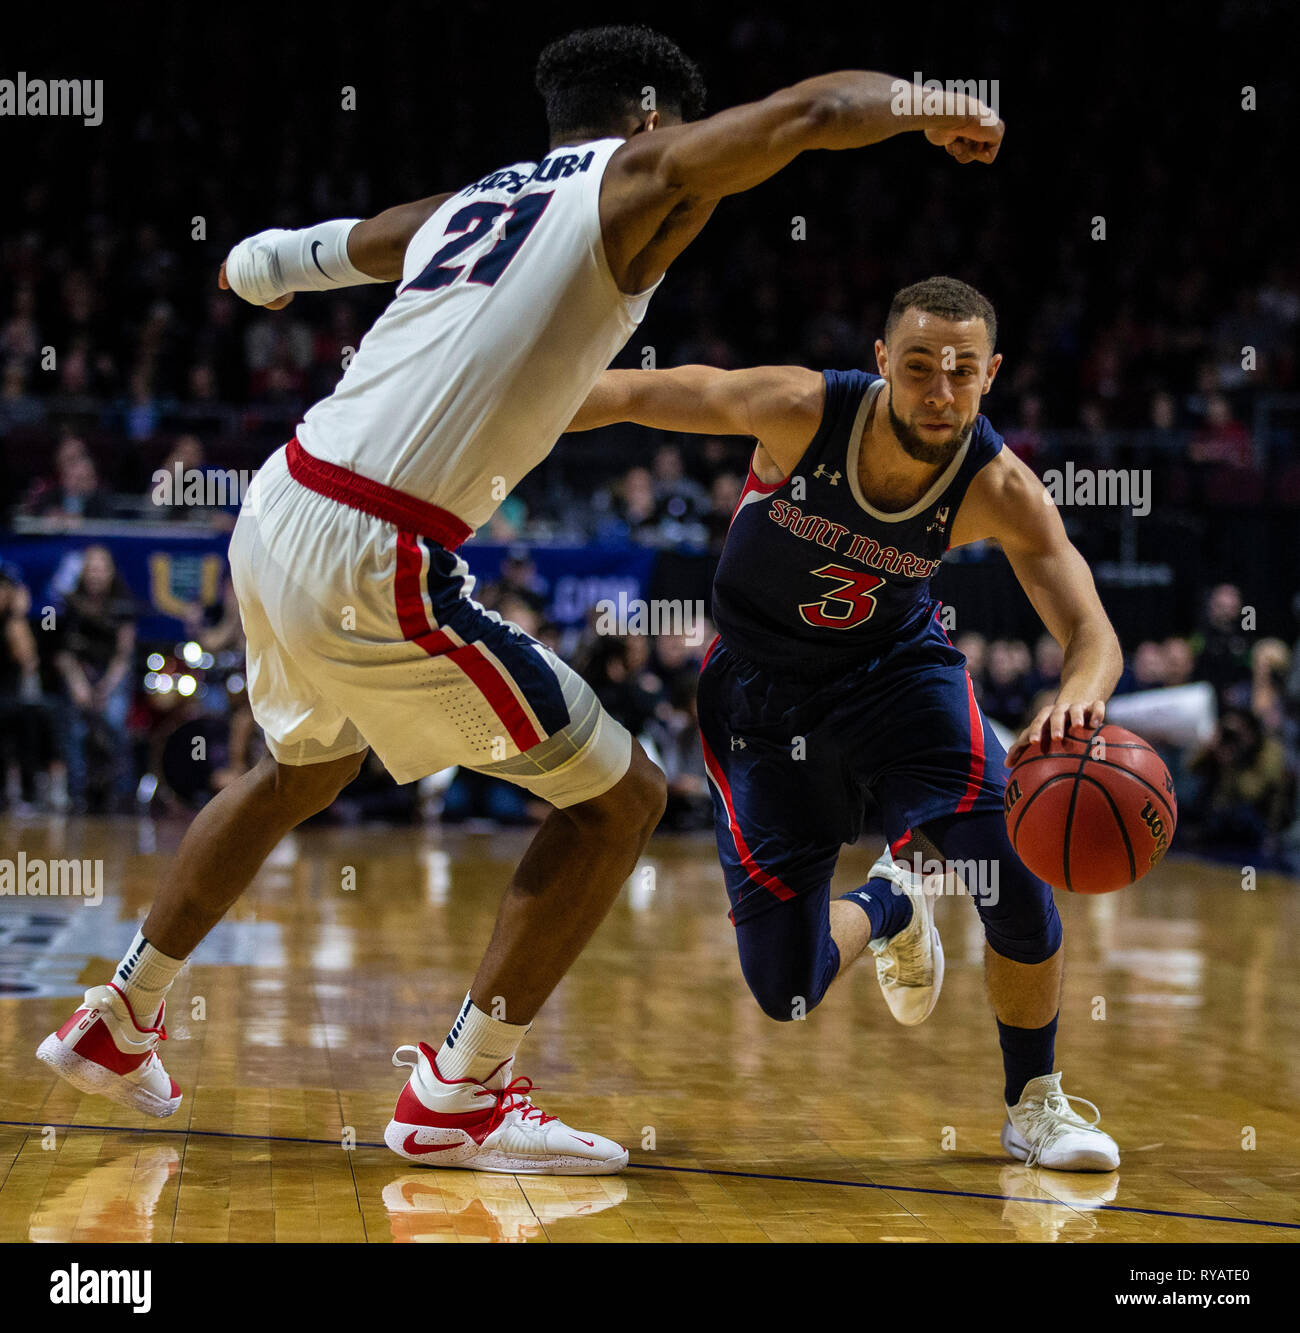 Mar 12 2019 Las Vegas, NV, U.S.A. St. Mary's guard Jordan Ford (3) drives to the basket during the NCAA West Coast Conference Men's Basketball Tournament championship between the Gonzaga Bulldogs and the Saint Mary's Gaels 60-47 win at Orleans Arena Las Vegas, NV. Thurman James/CSM Stock Photo